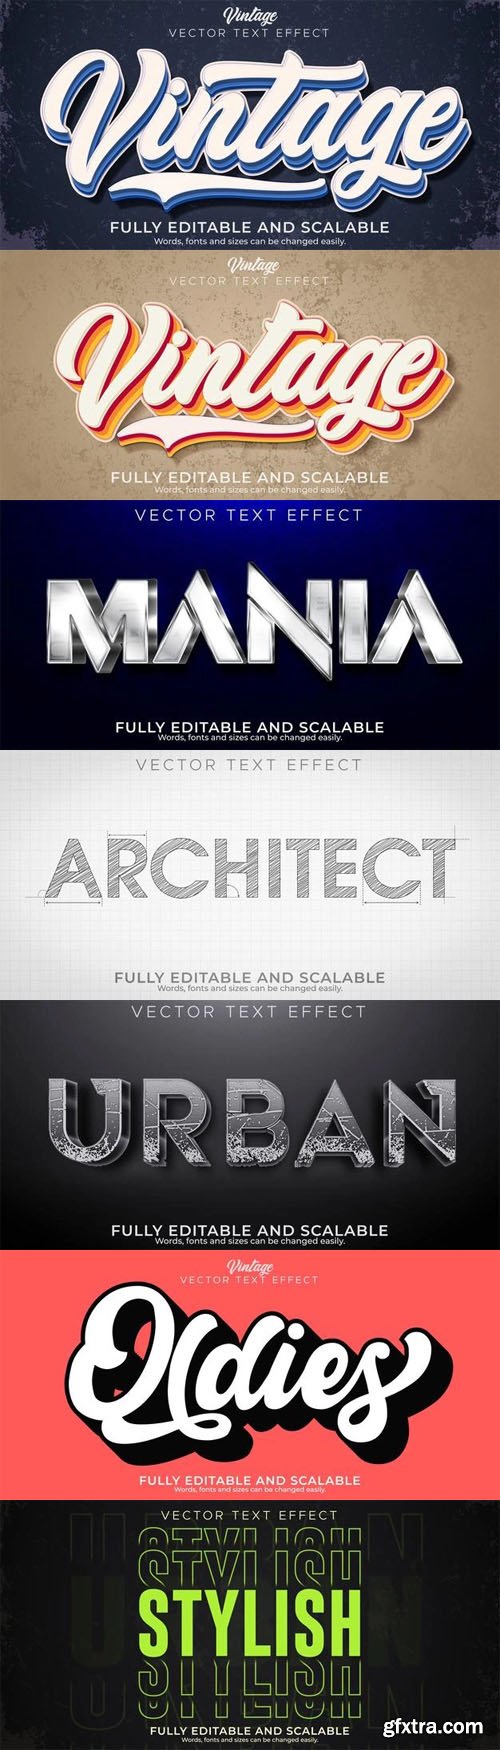 14 Text Effects Vector Styles Templates